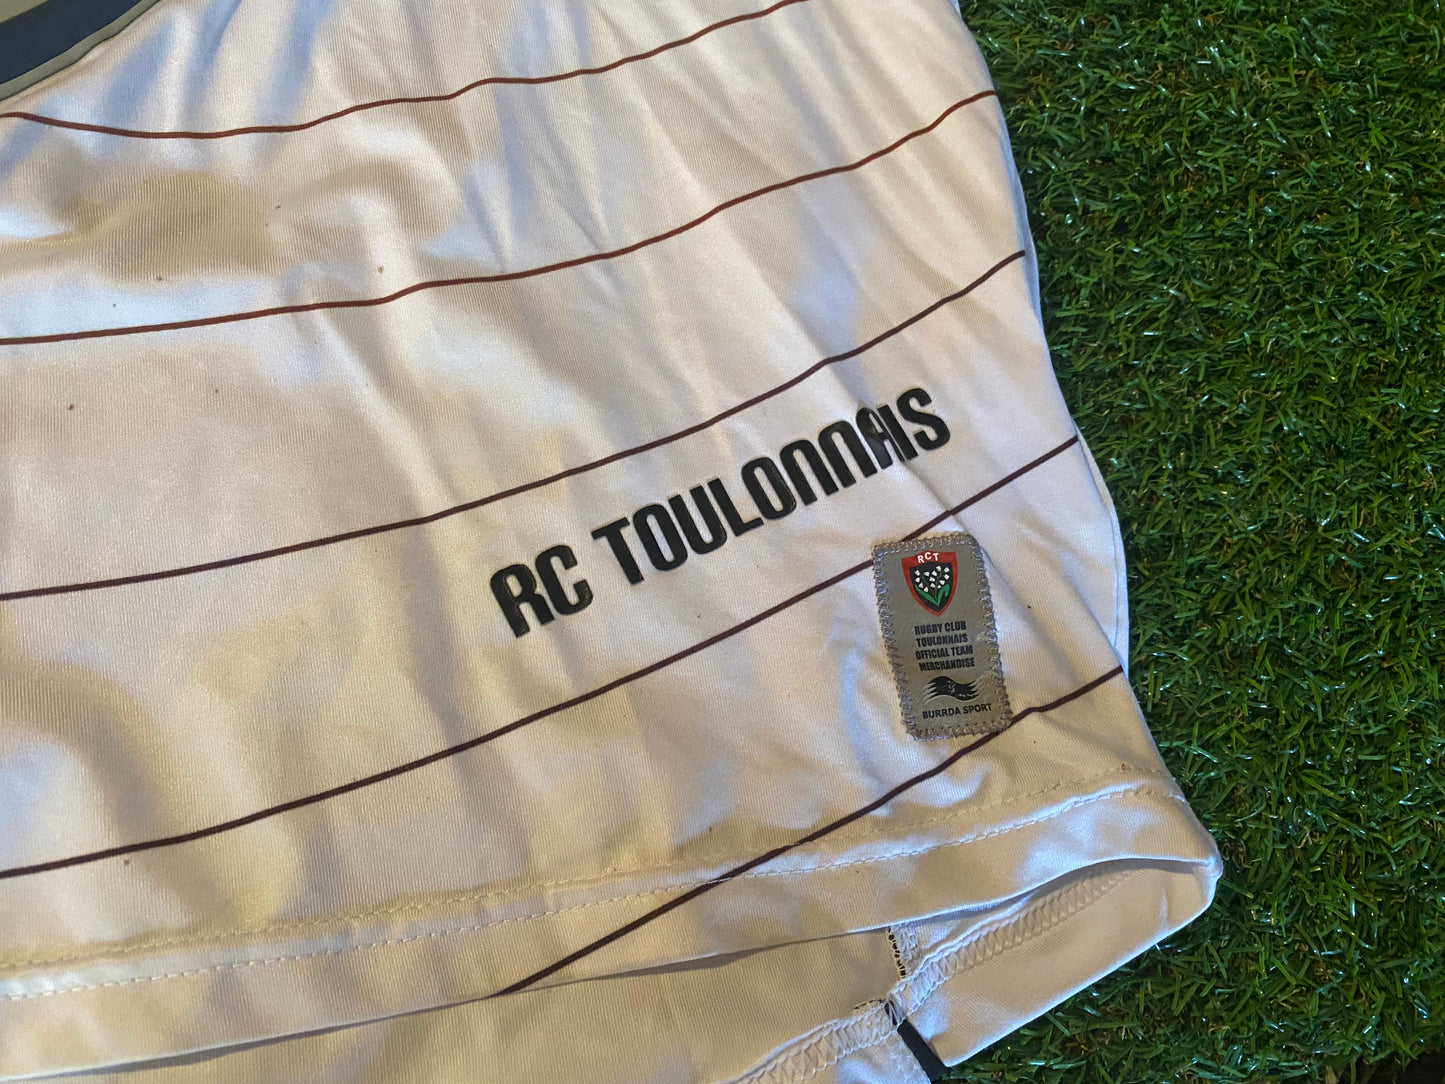 RCT Touloun France French Rugby Union Football Large Mans Player Issued Jersey